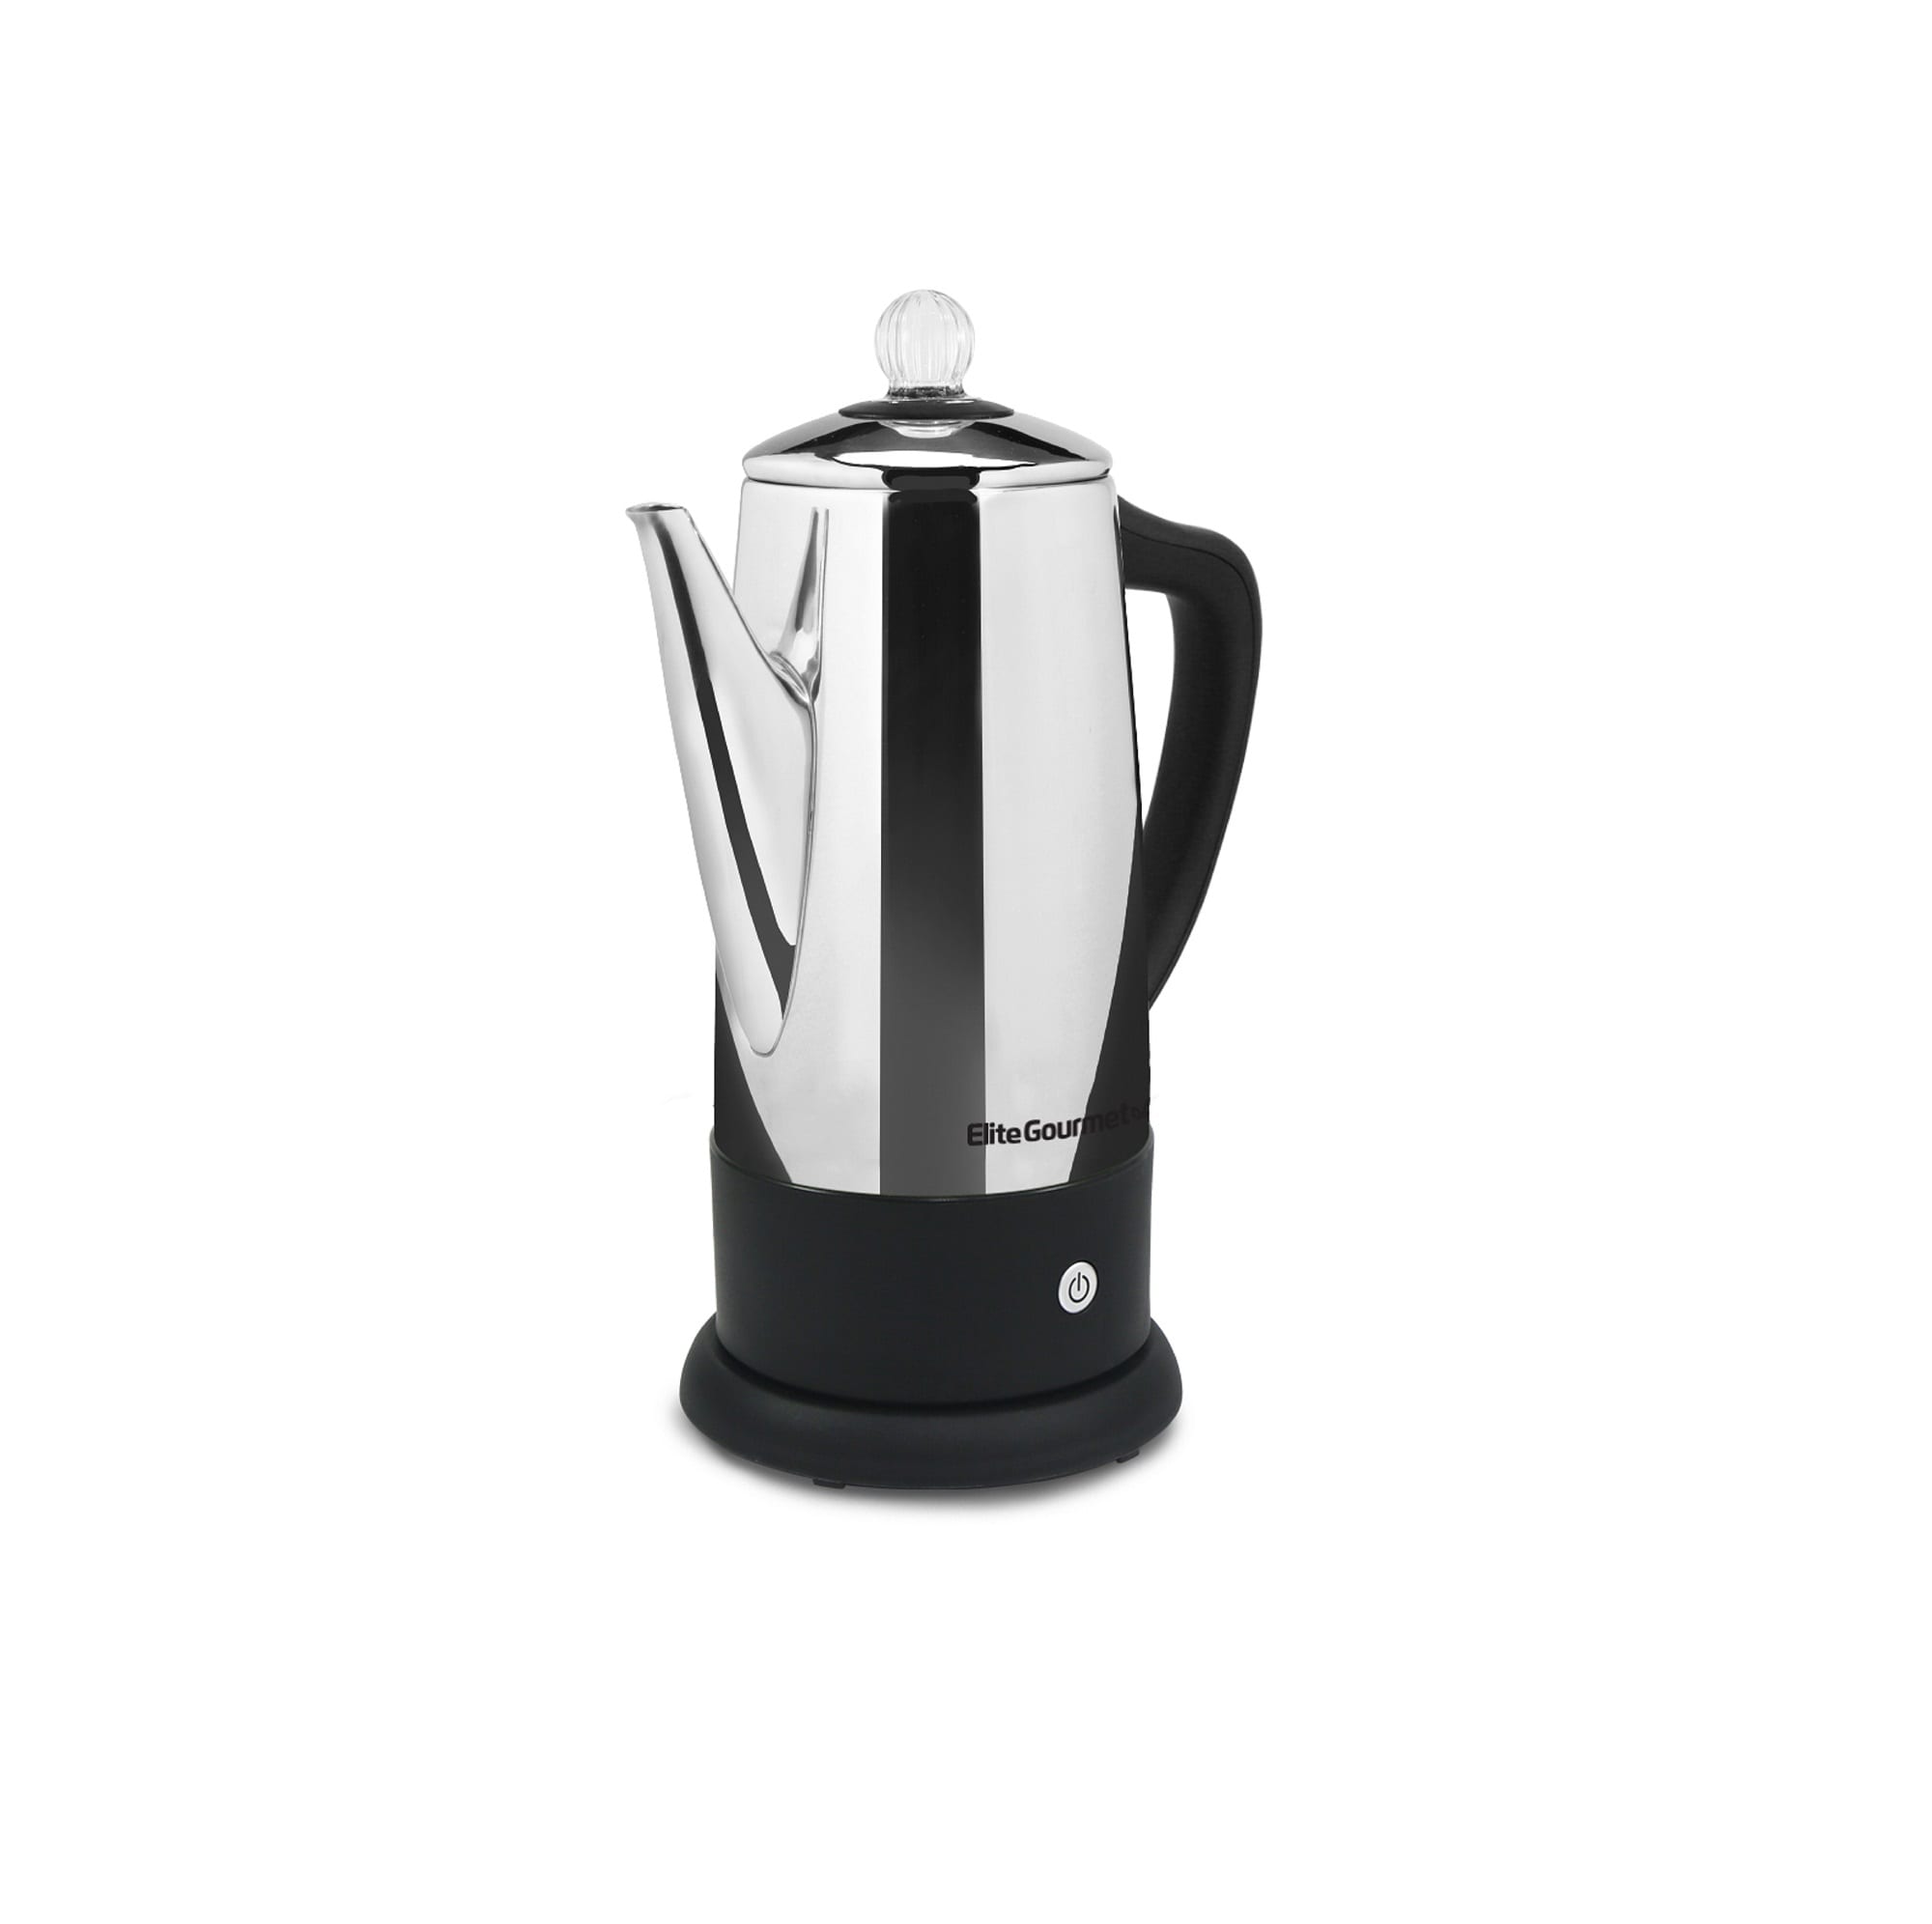 New and used Coffee Percolators for sale